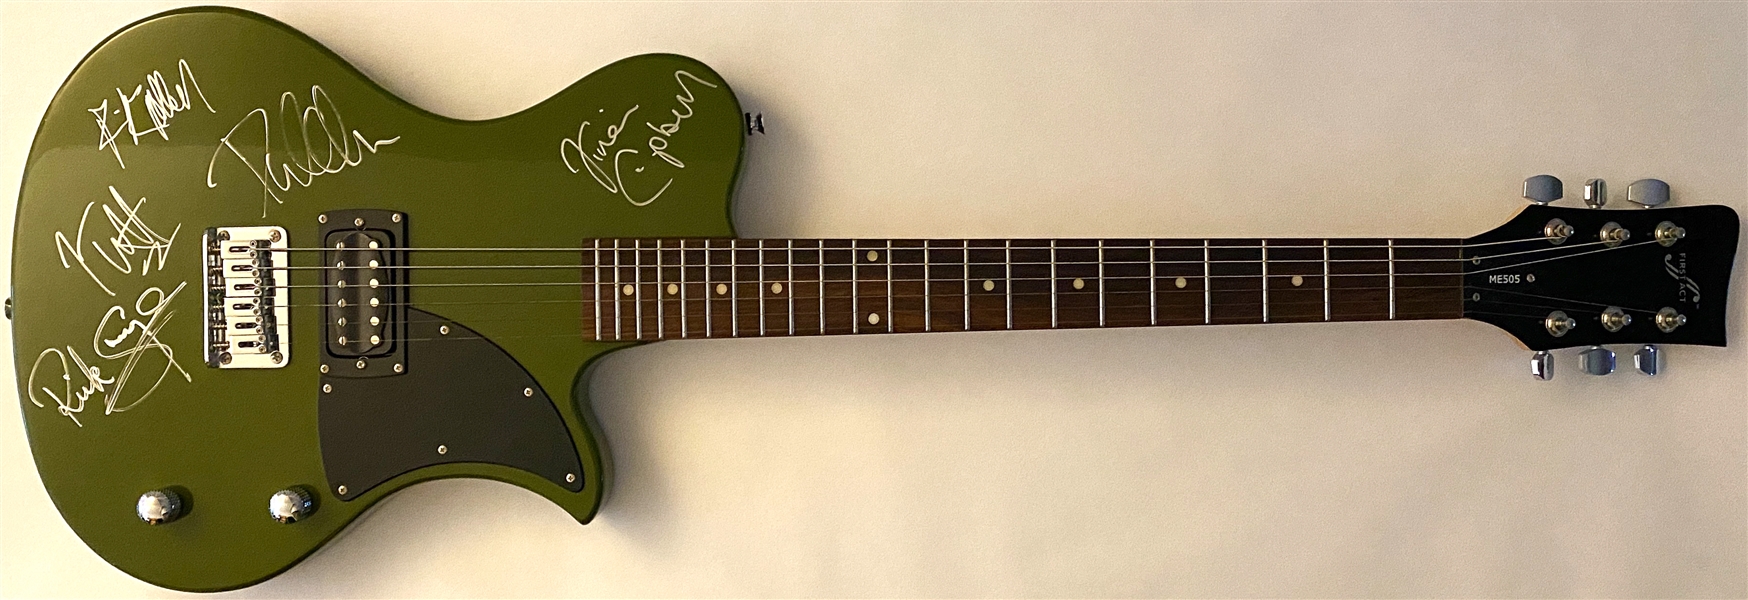 Def Leppard PRISTINE In-Person Group Signed Electric Guitar (5 Sigs) (Beckett/BAS Guaranteed)